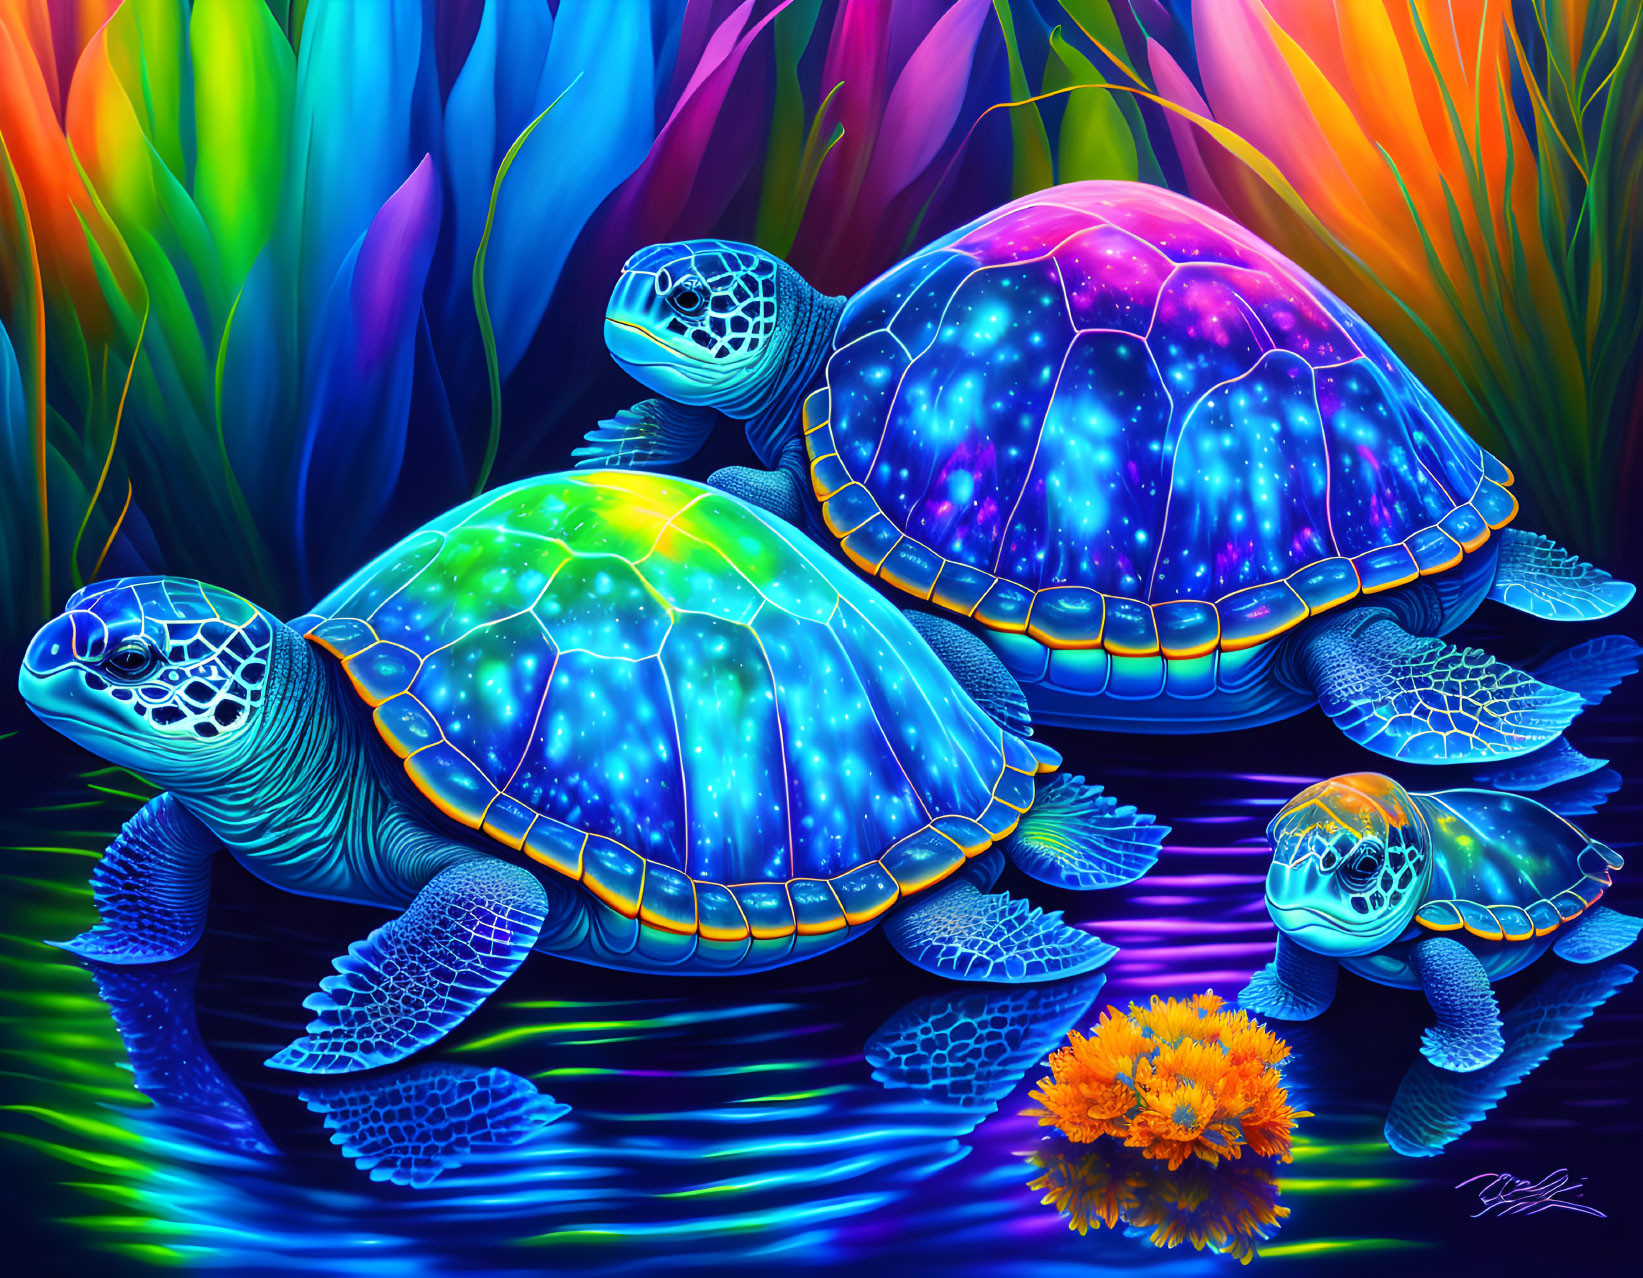 Colorful digital artwork: Three turtles with neon-lit, starry shells on abstract rainbow background